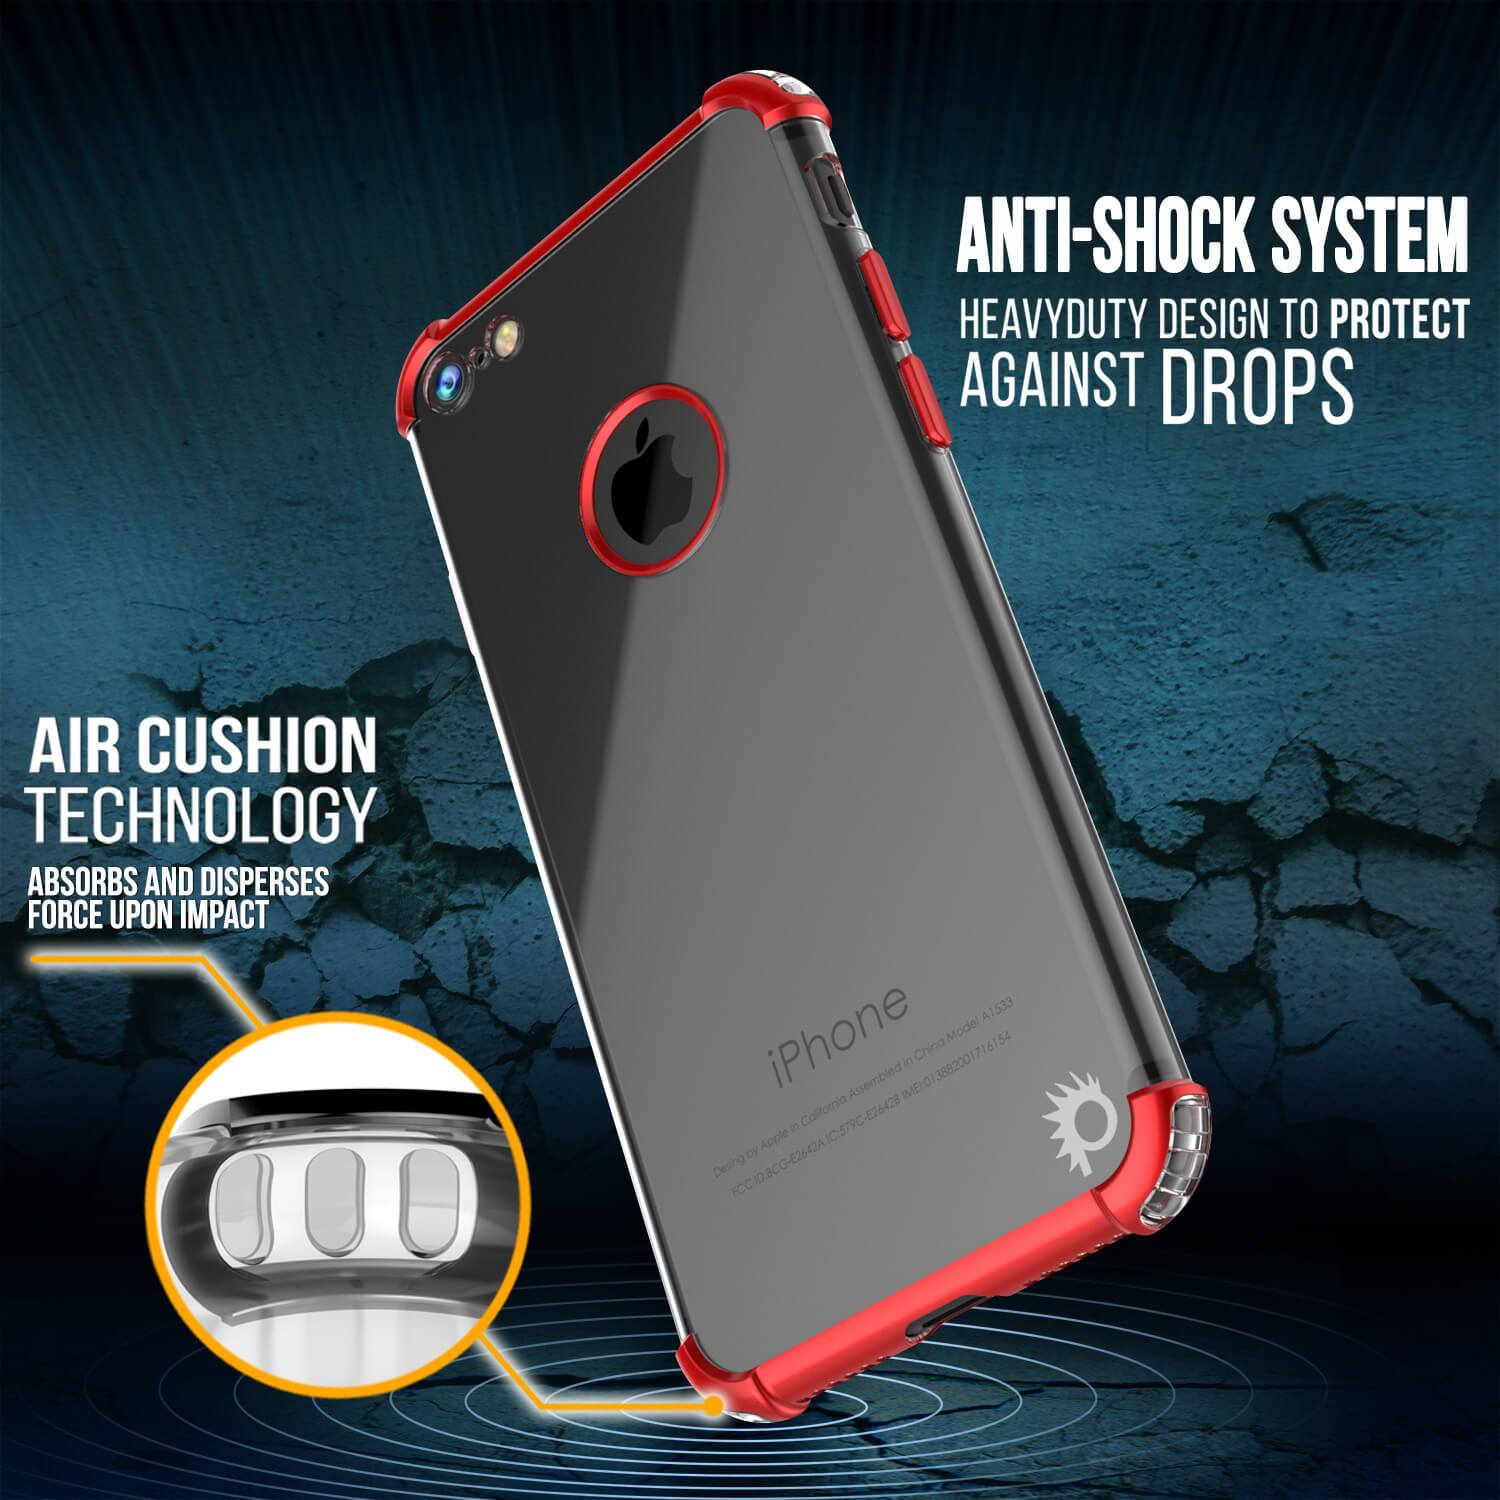 iPhone 8 Case, Punkcase [BLAZE RedSERIES] Protective Cover W/ PunkShield Screen Protector